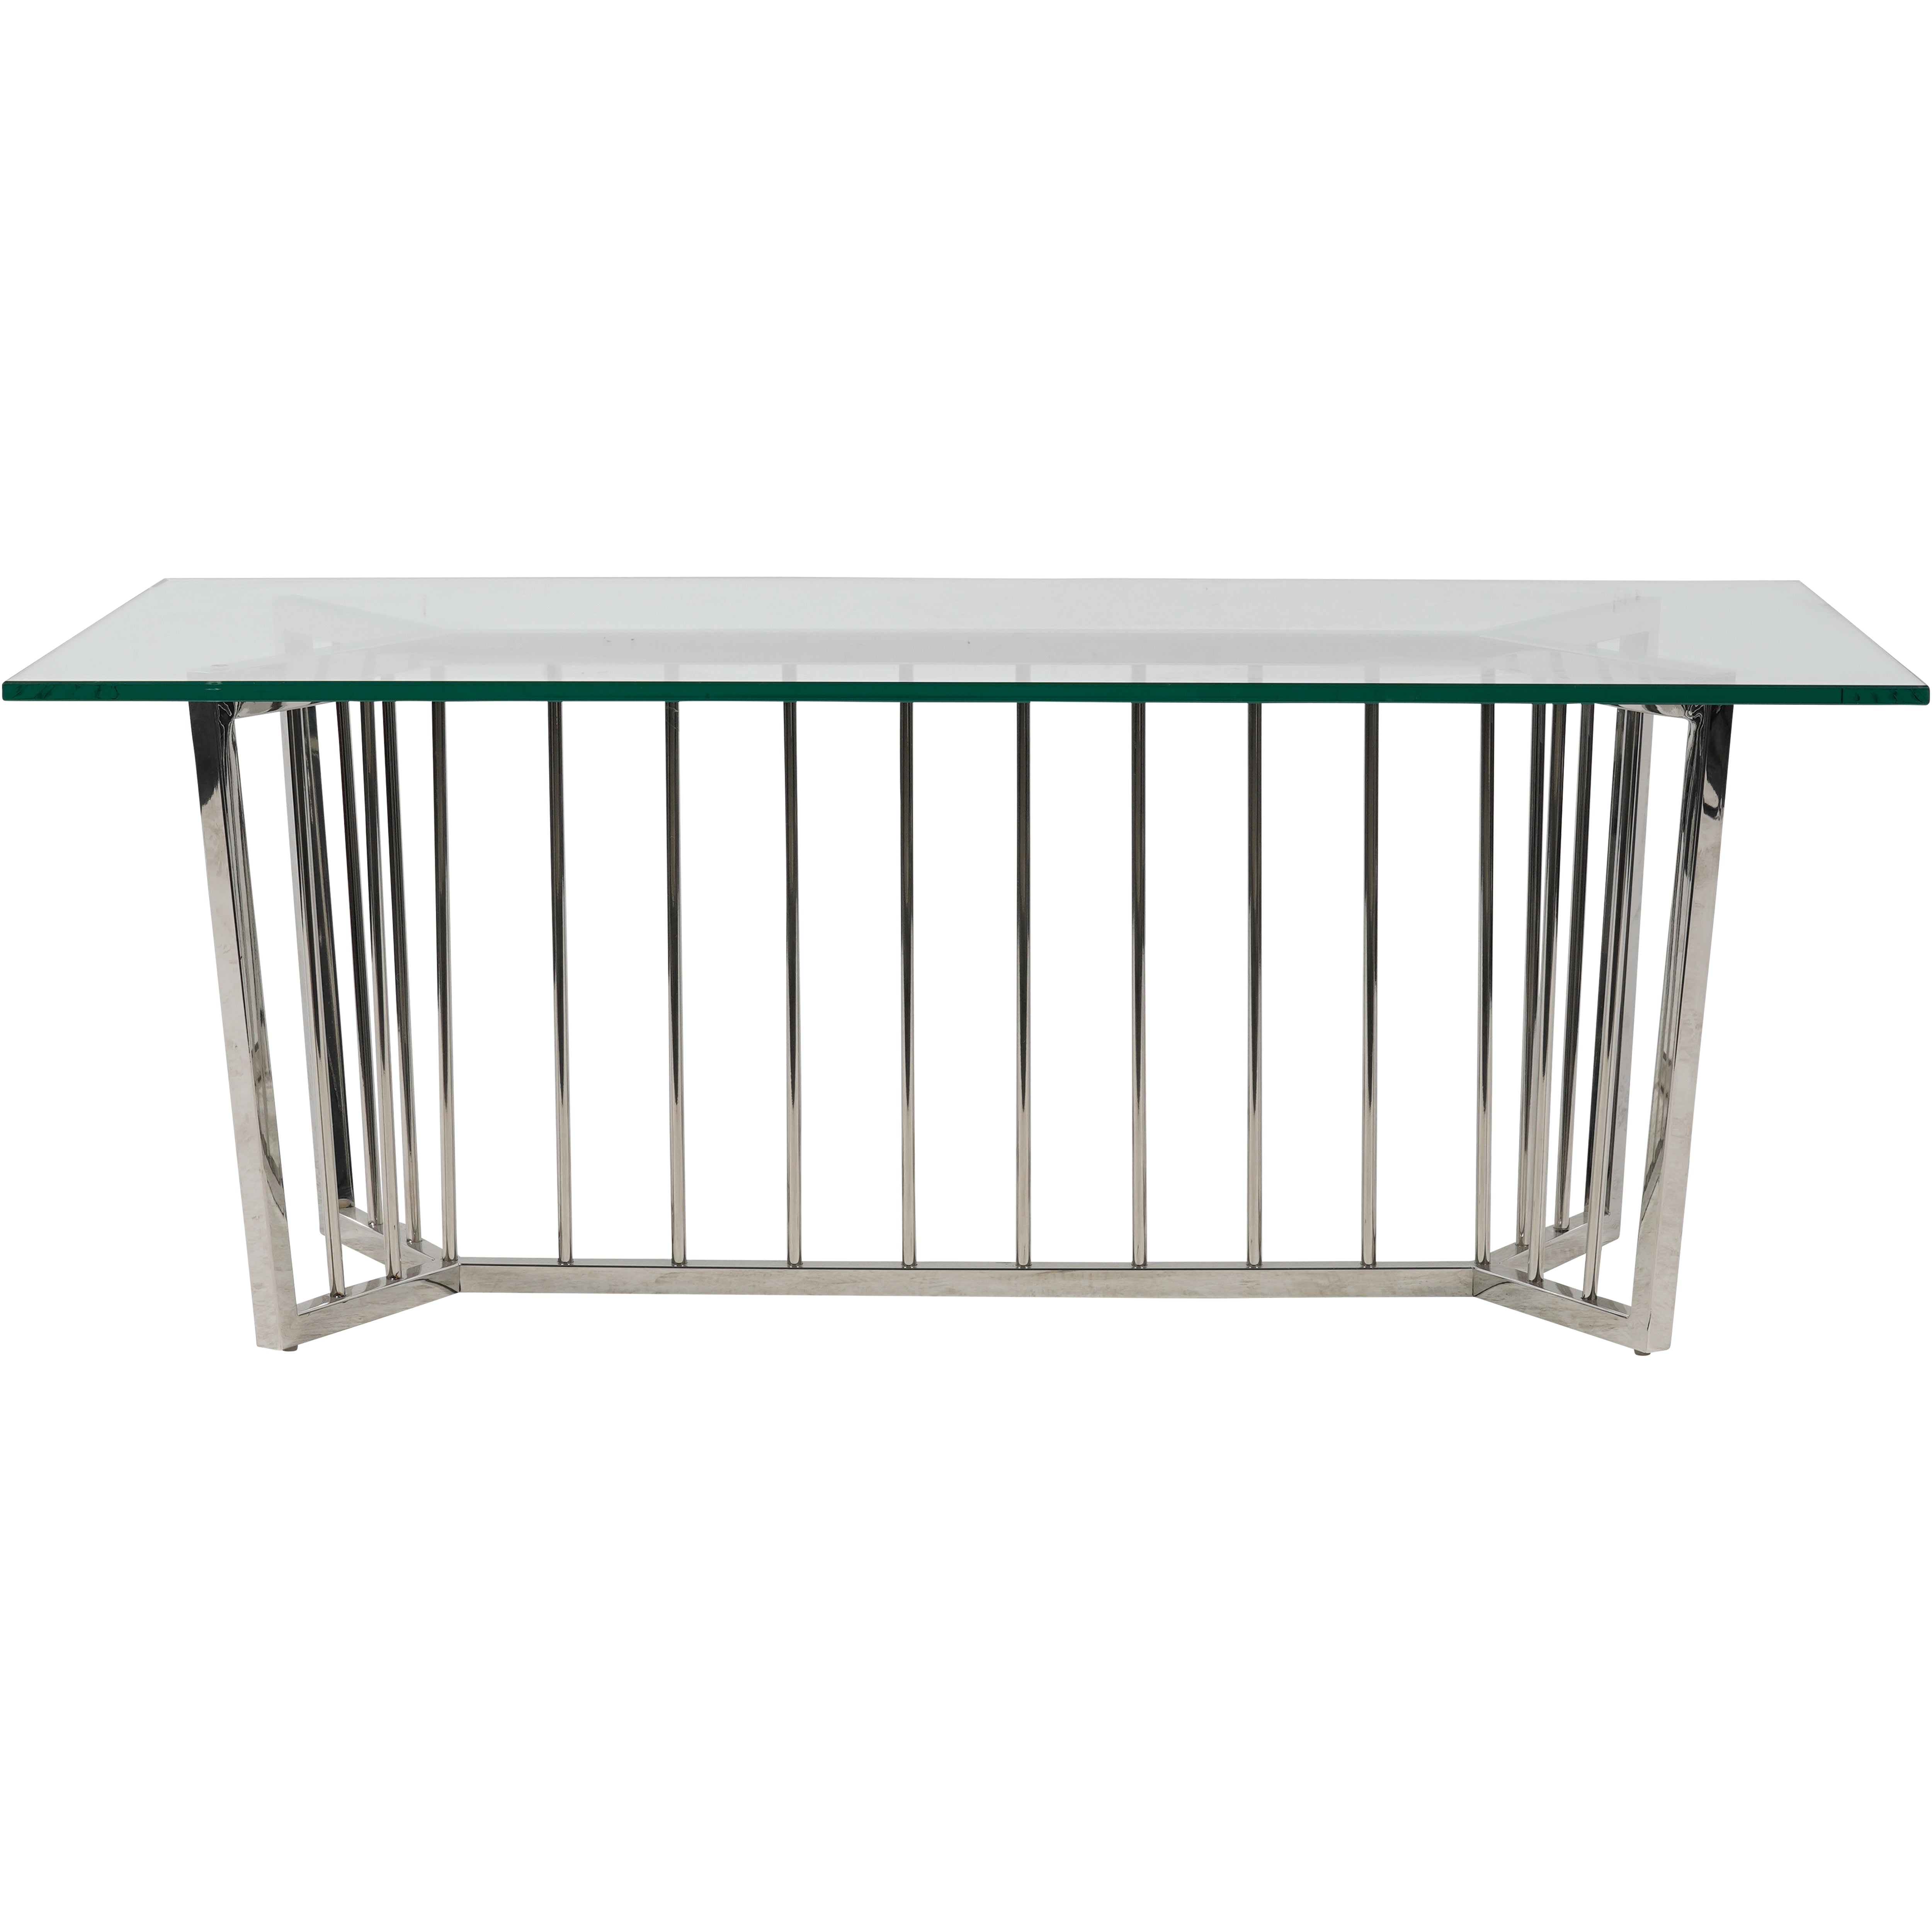 Alberta Stainless Steel Frame and Clear Glass Rectangular Coffee Table 110x60cm